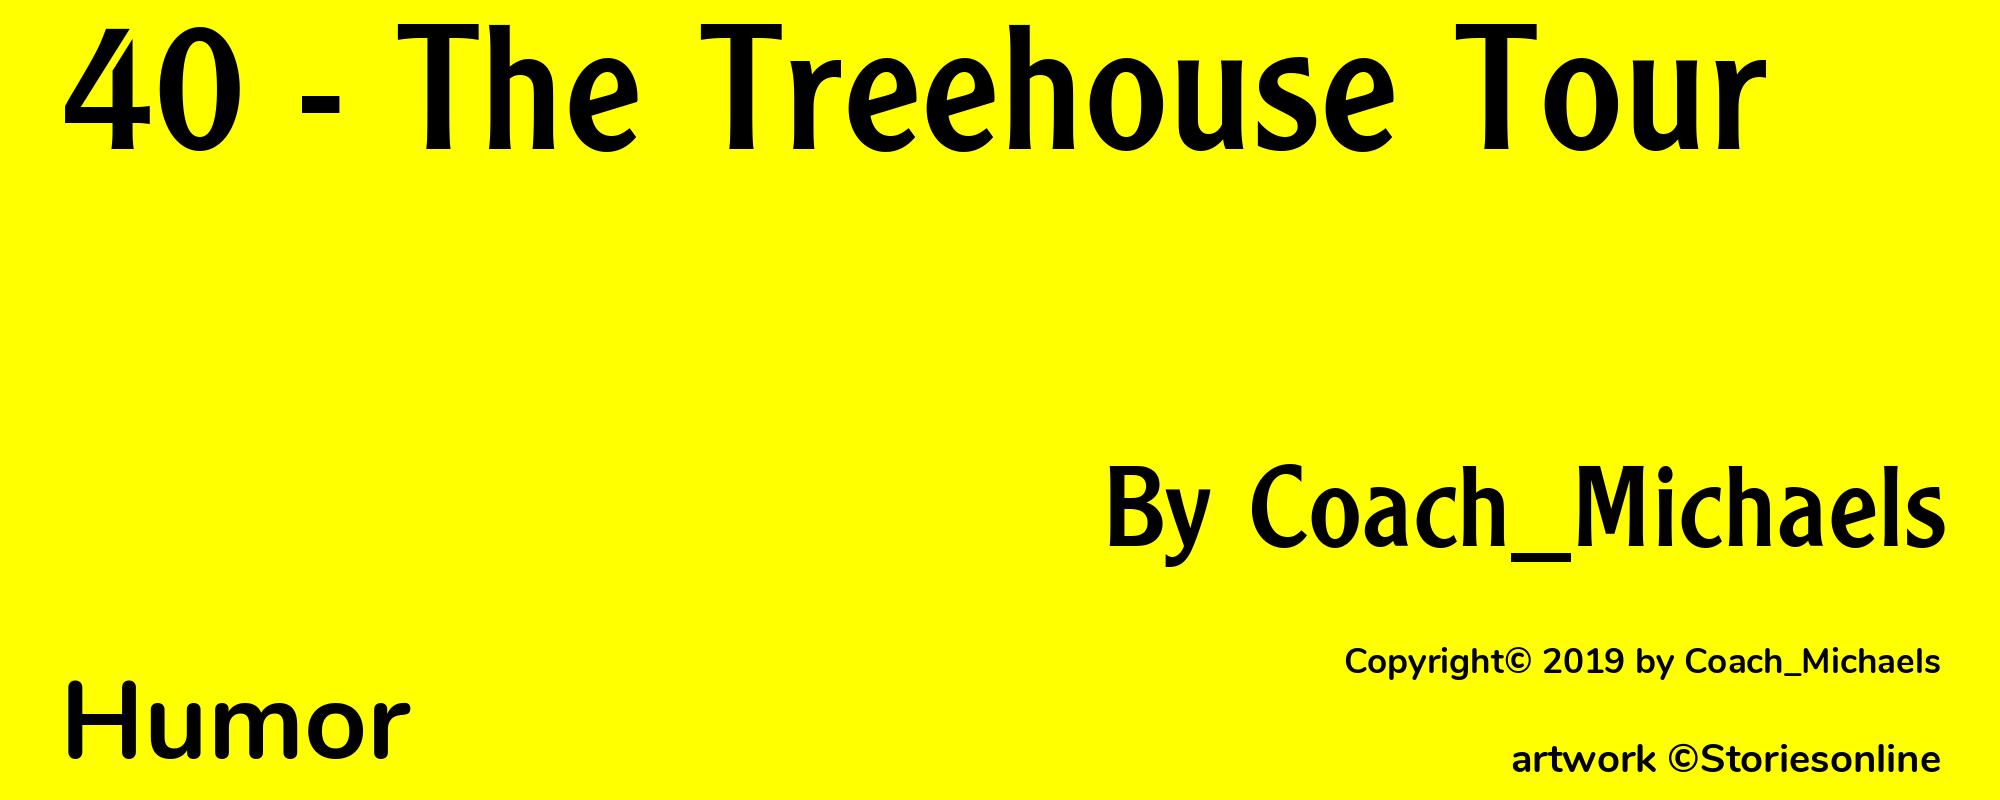 40 - The Treehouse Tour - Cover